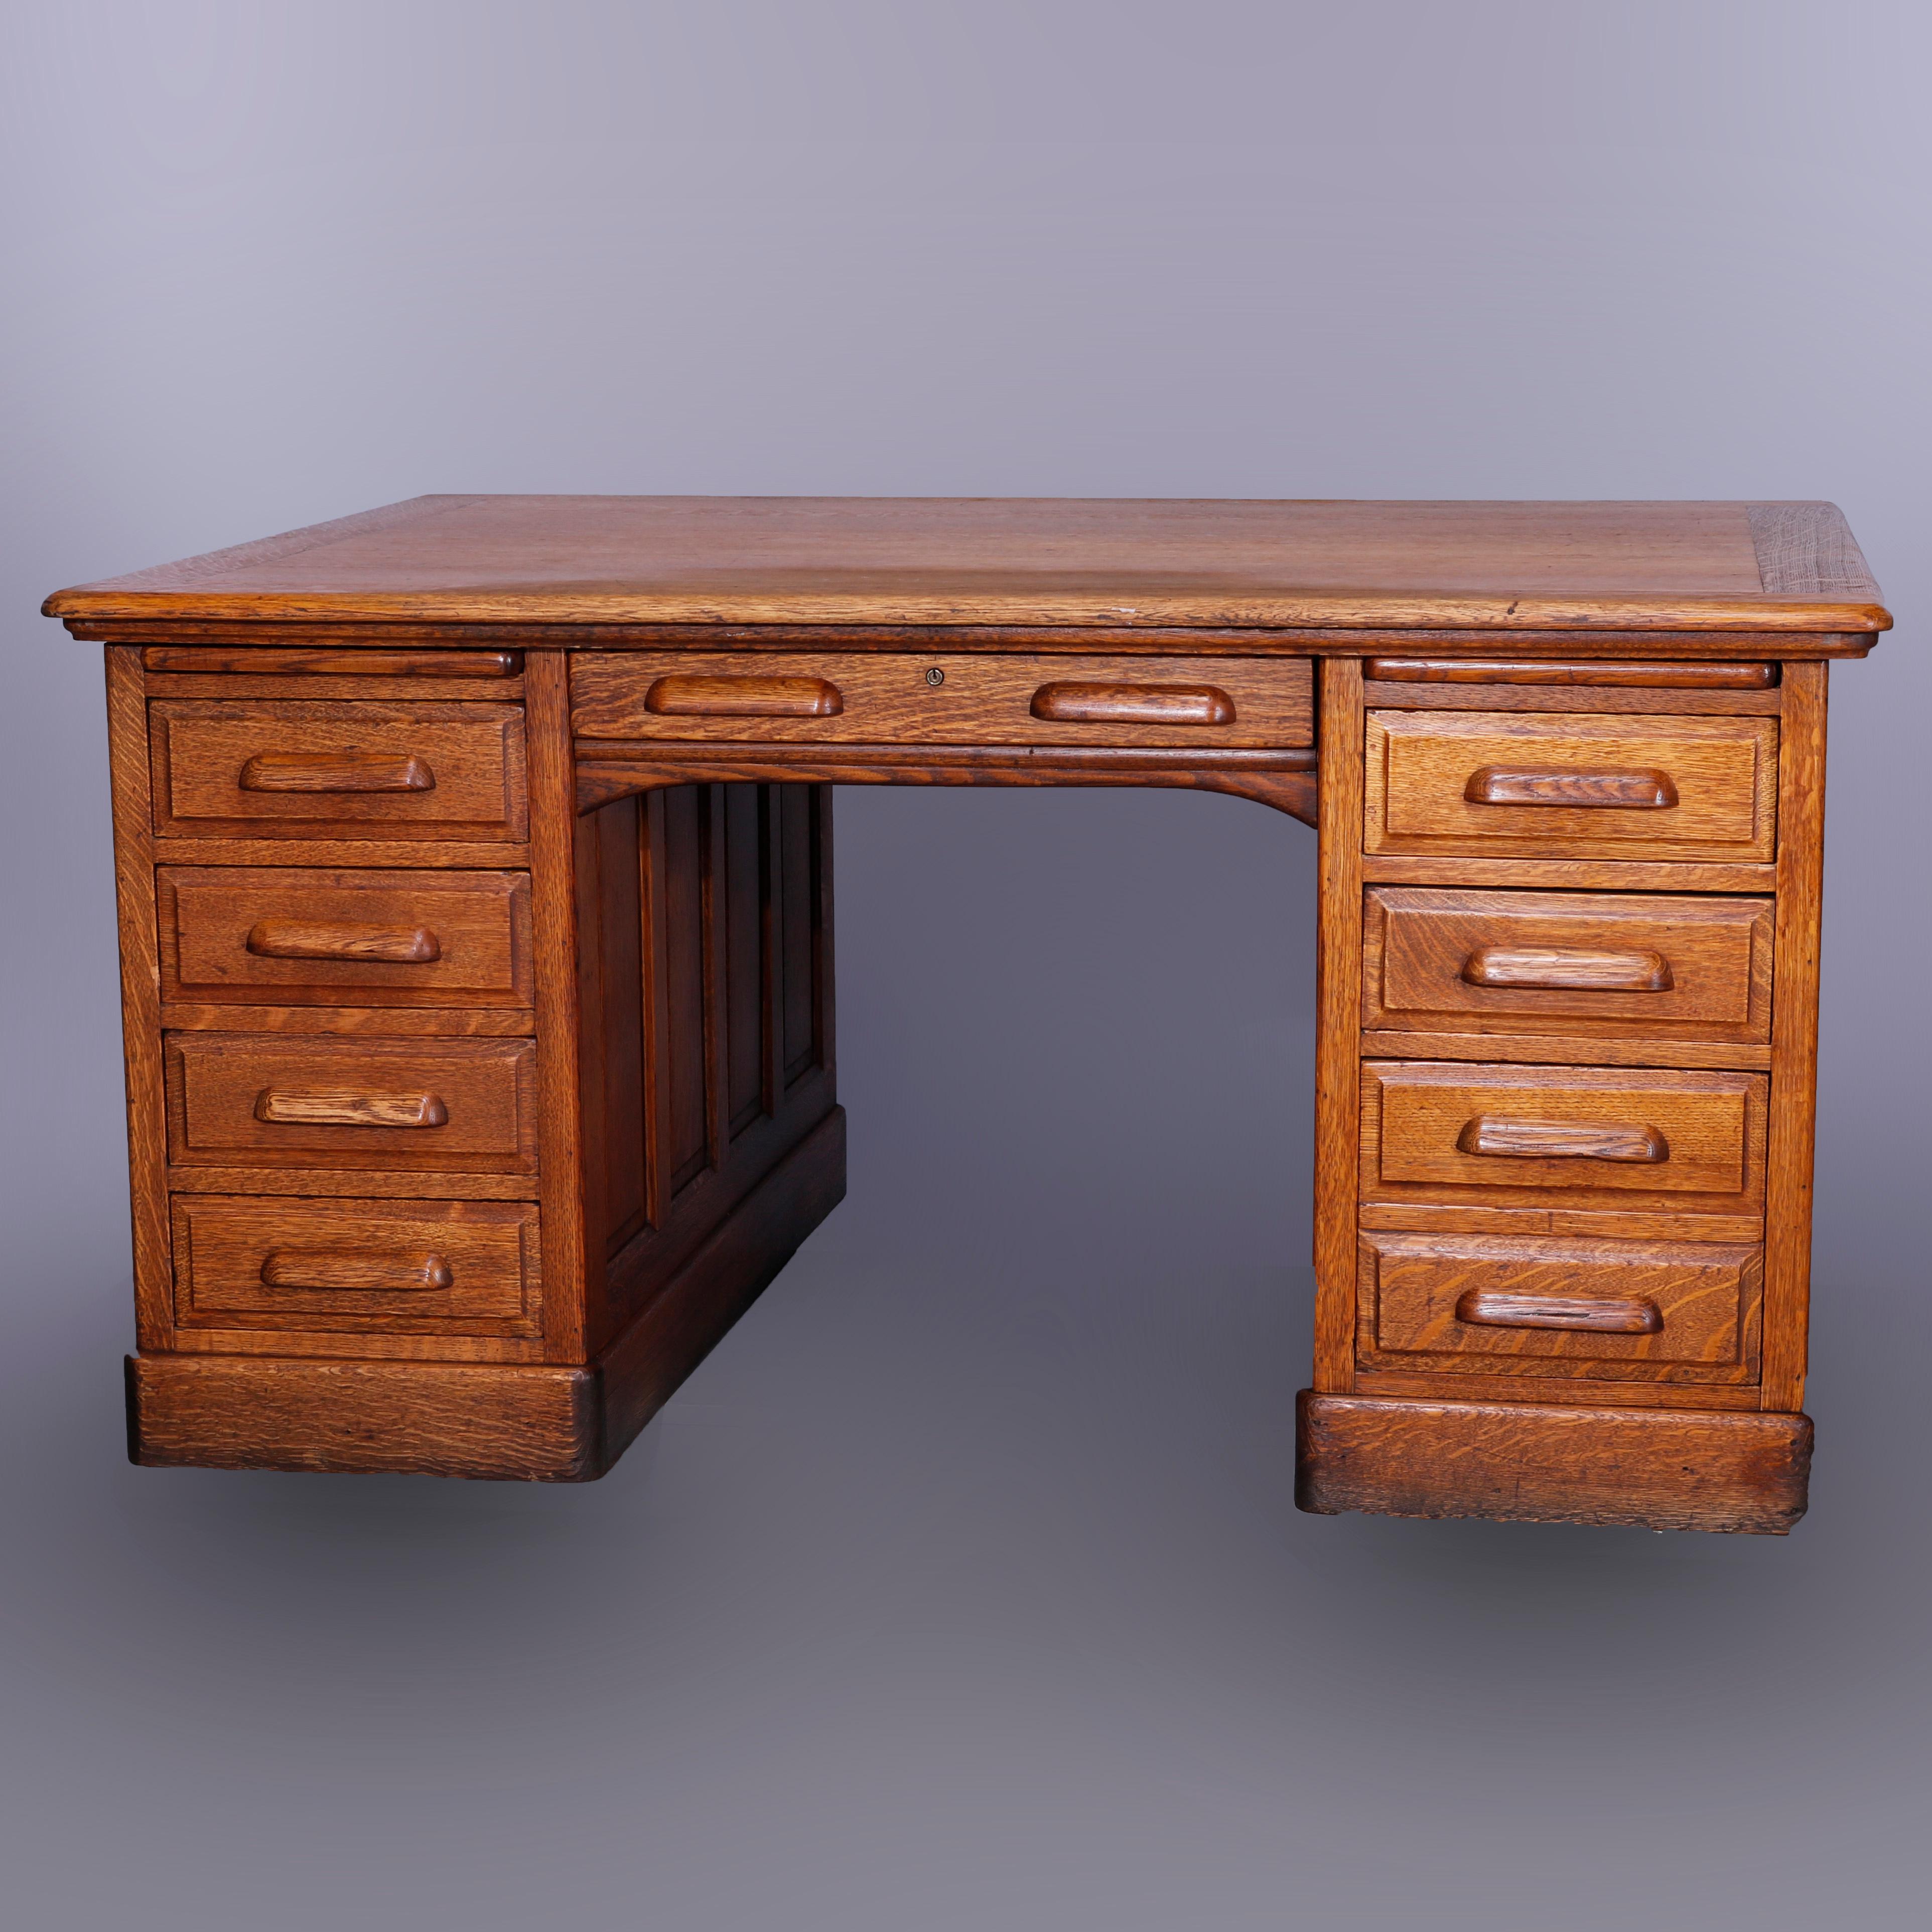 An antique partners desk offers oak raised panel construction with flanking drawer towers, c1900

Measures - 30.25'' H x 59.75'' W x 48'' D.